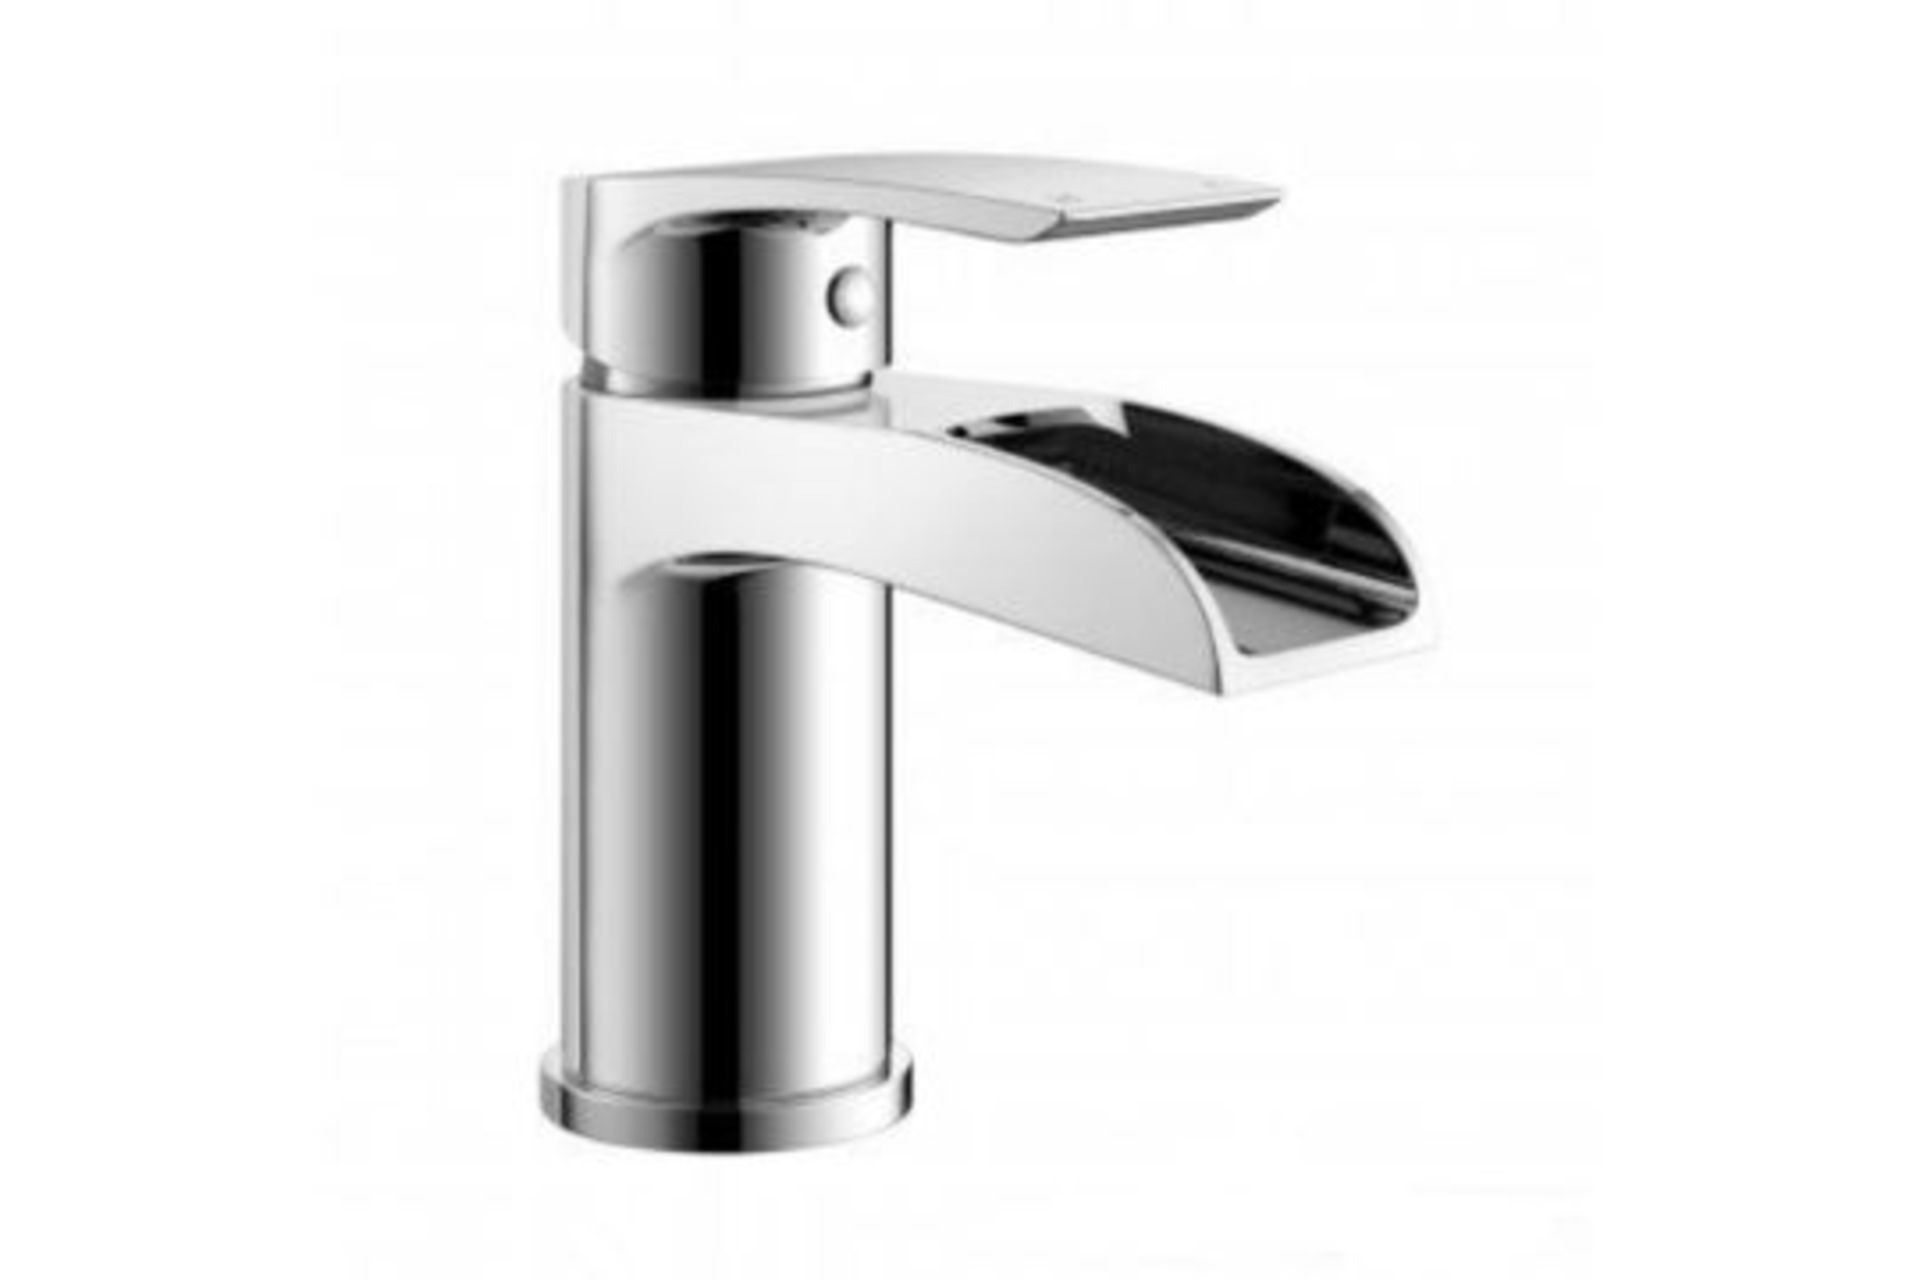 New & Boxed Avis Waterfall Basin Mixer Tap. Tb151.Chrome Plated Solid Brass Mirror Finish Lates... - Image 2 of 2